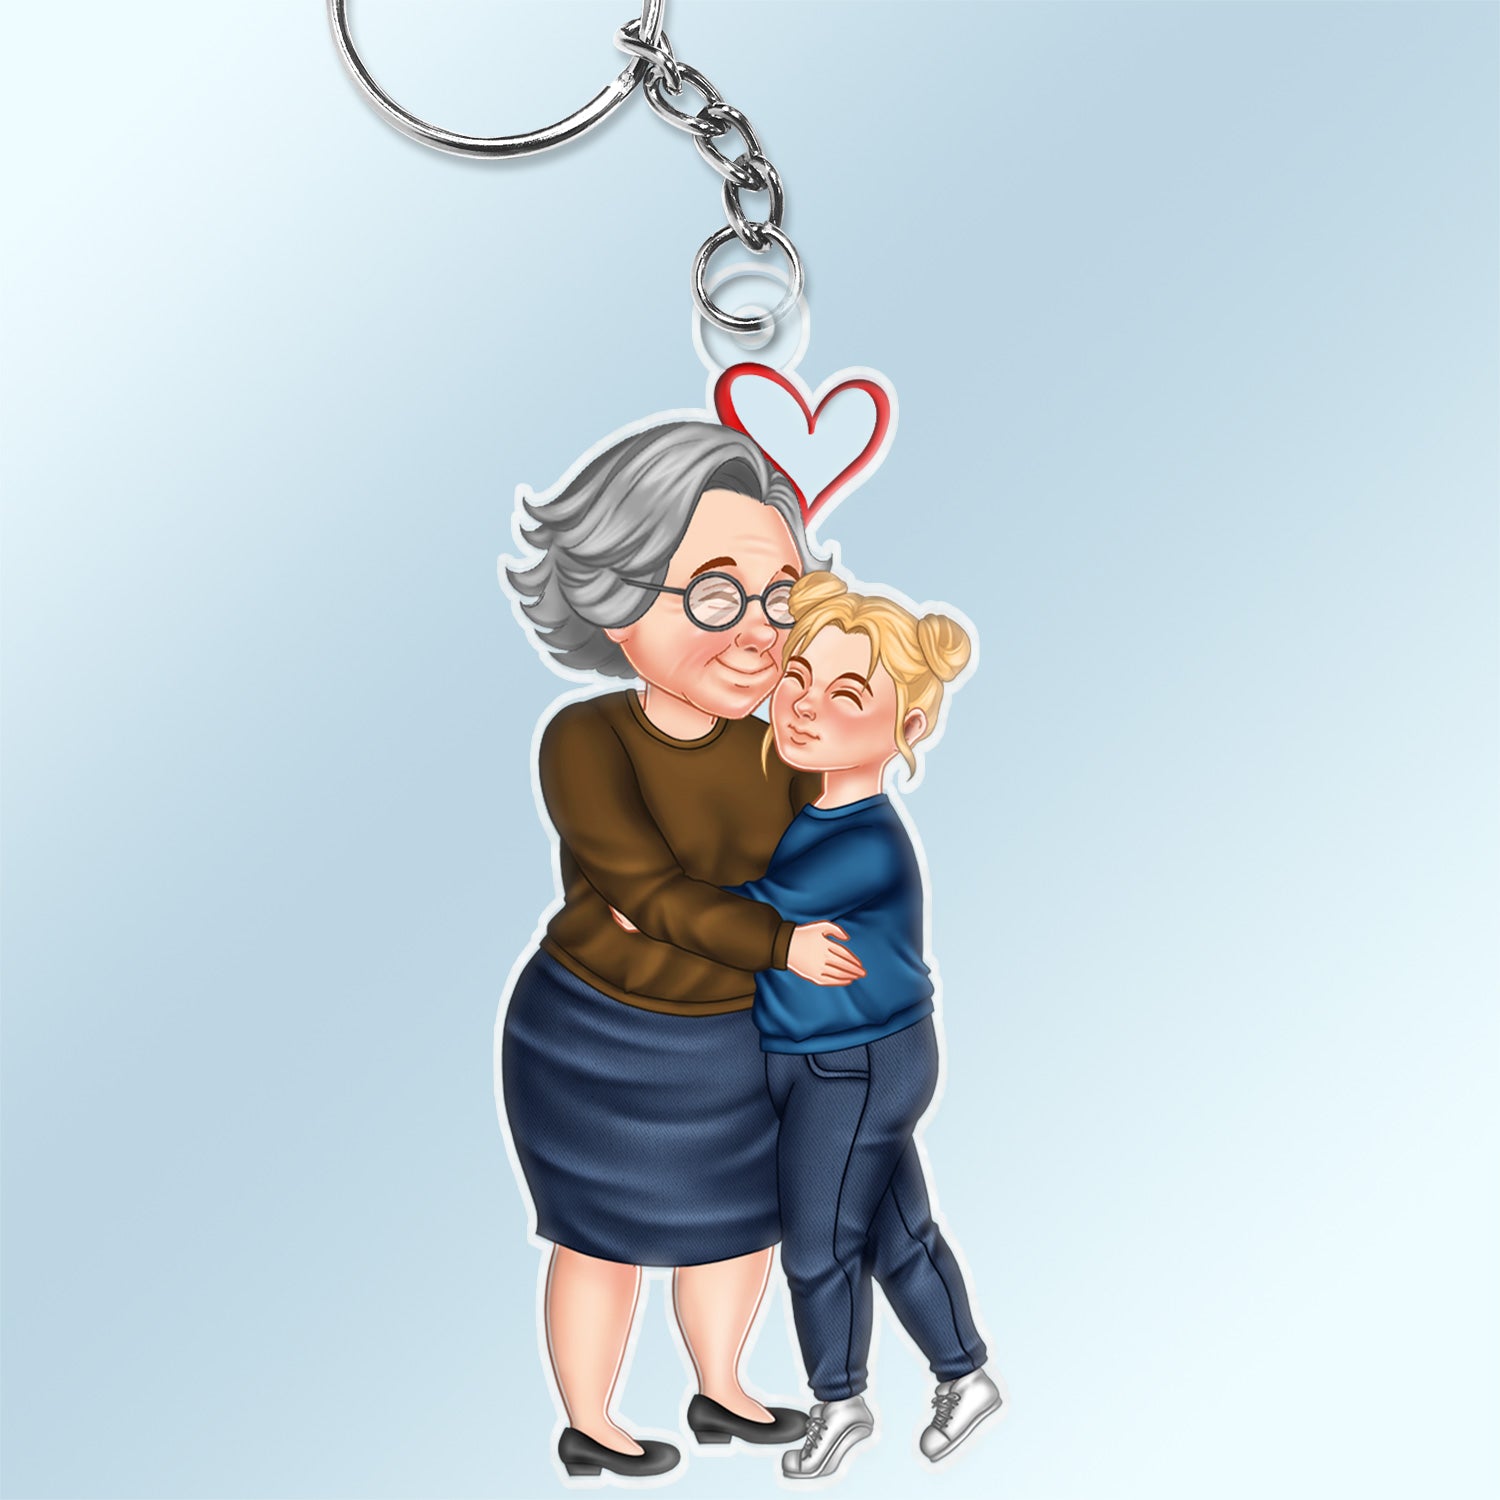 Arm In Arm Hugging - Loving Gift For Mom, Mother, Nana, Grandma - Personalized Cutout Acrylic Keychain